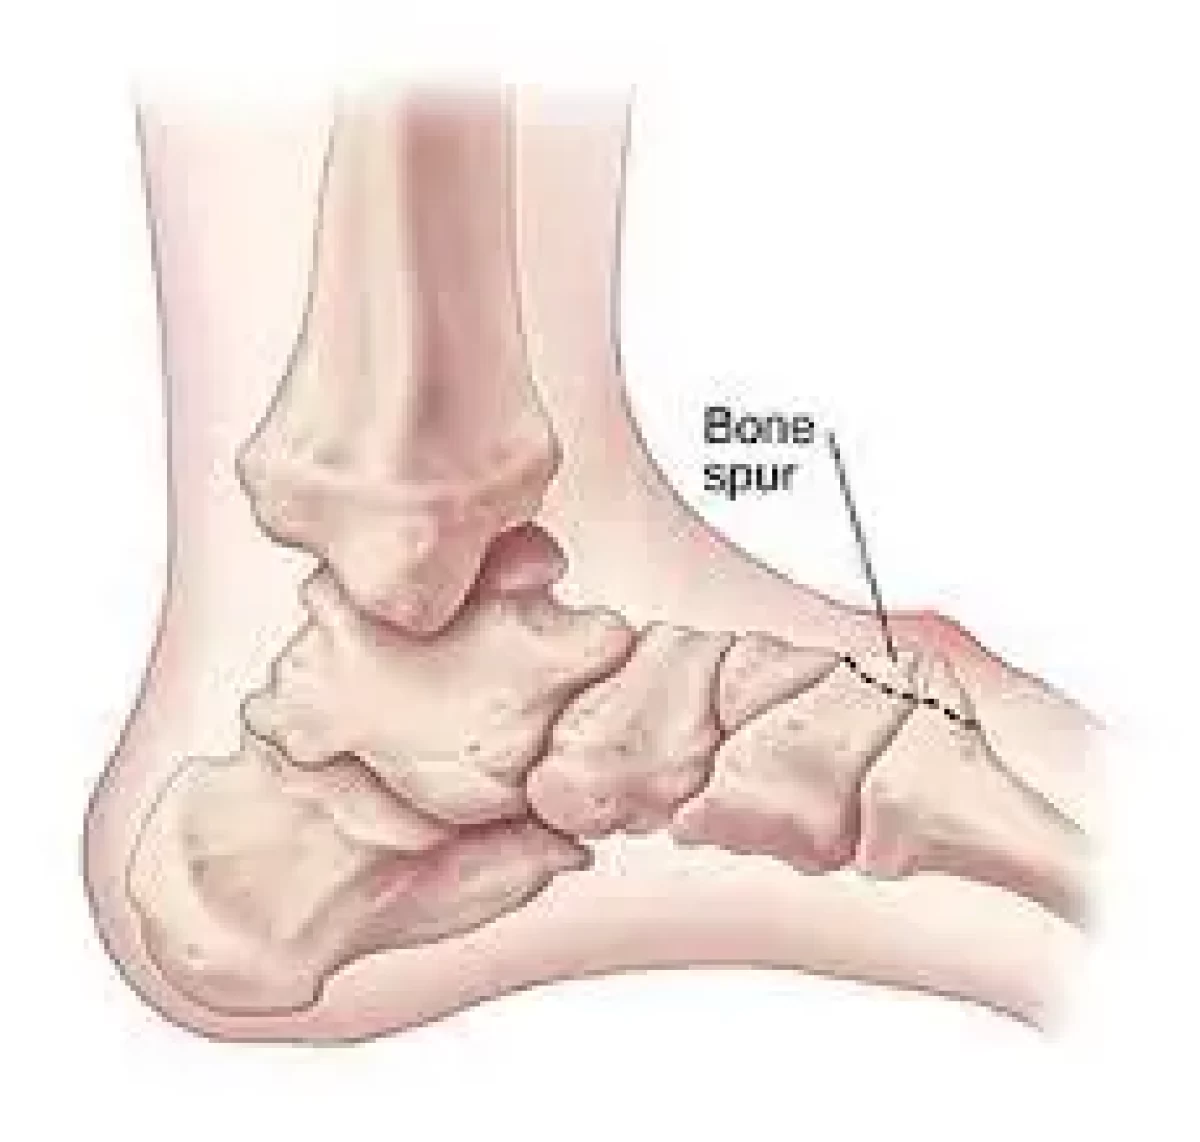 My FootDr - Ever noticed a small, pointed outgrowth under your heel causing  discomfort? That could be a heel spur! Whether it's painless or causing  discomfort, it's often linked with plantar fasciitis.